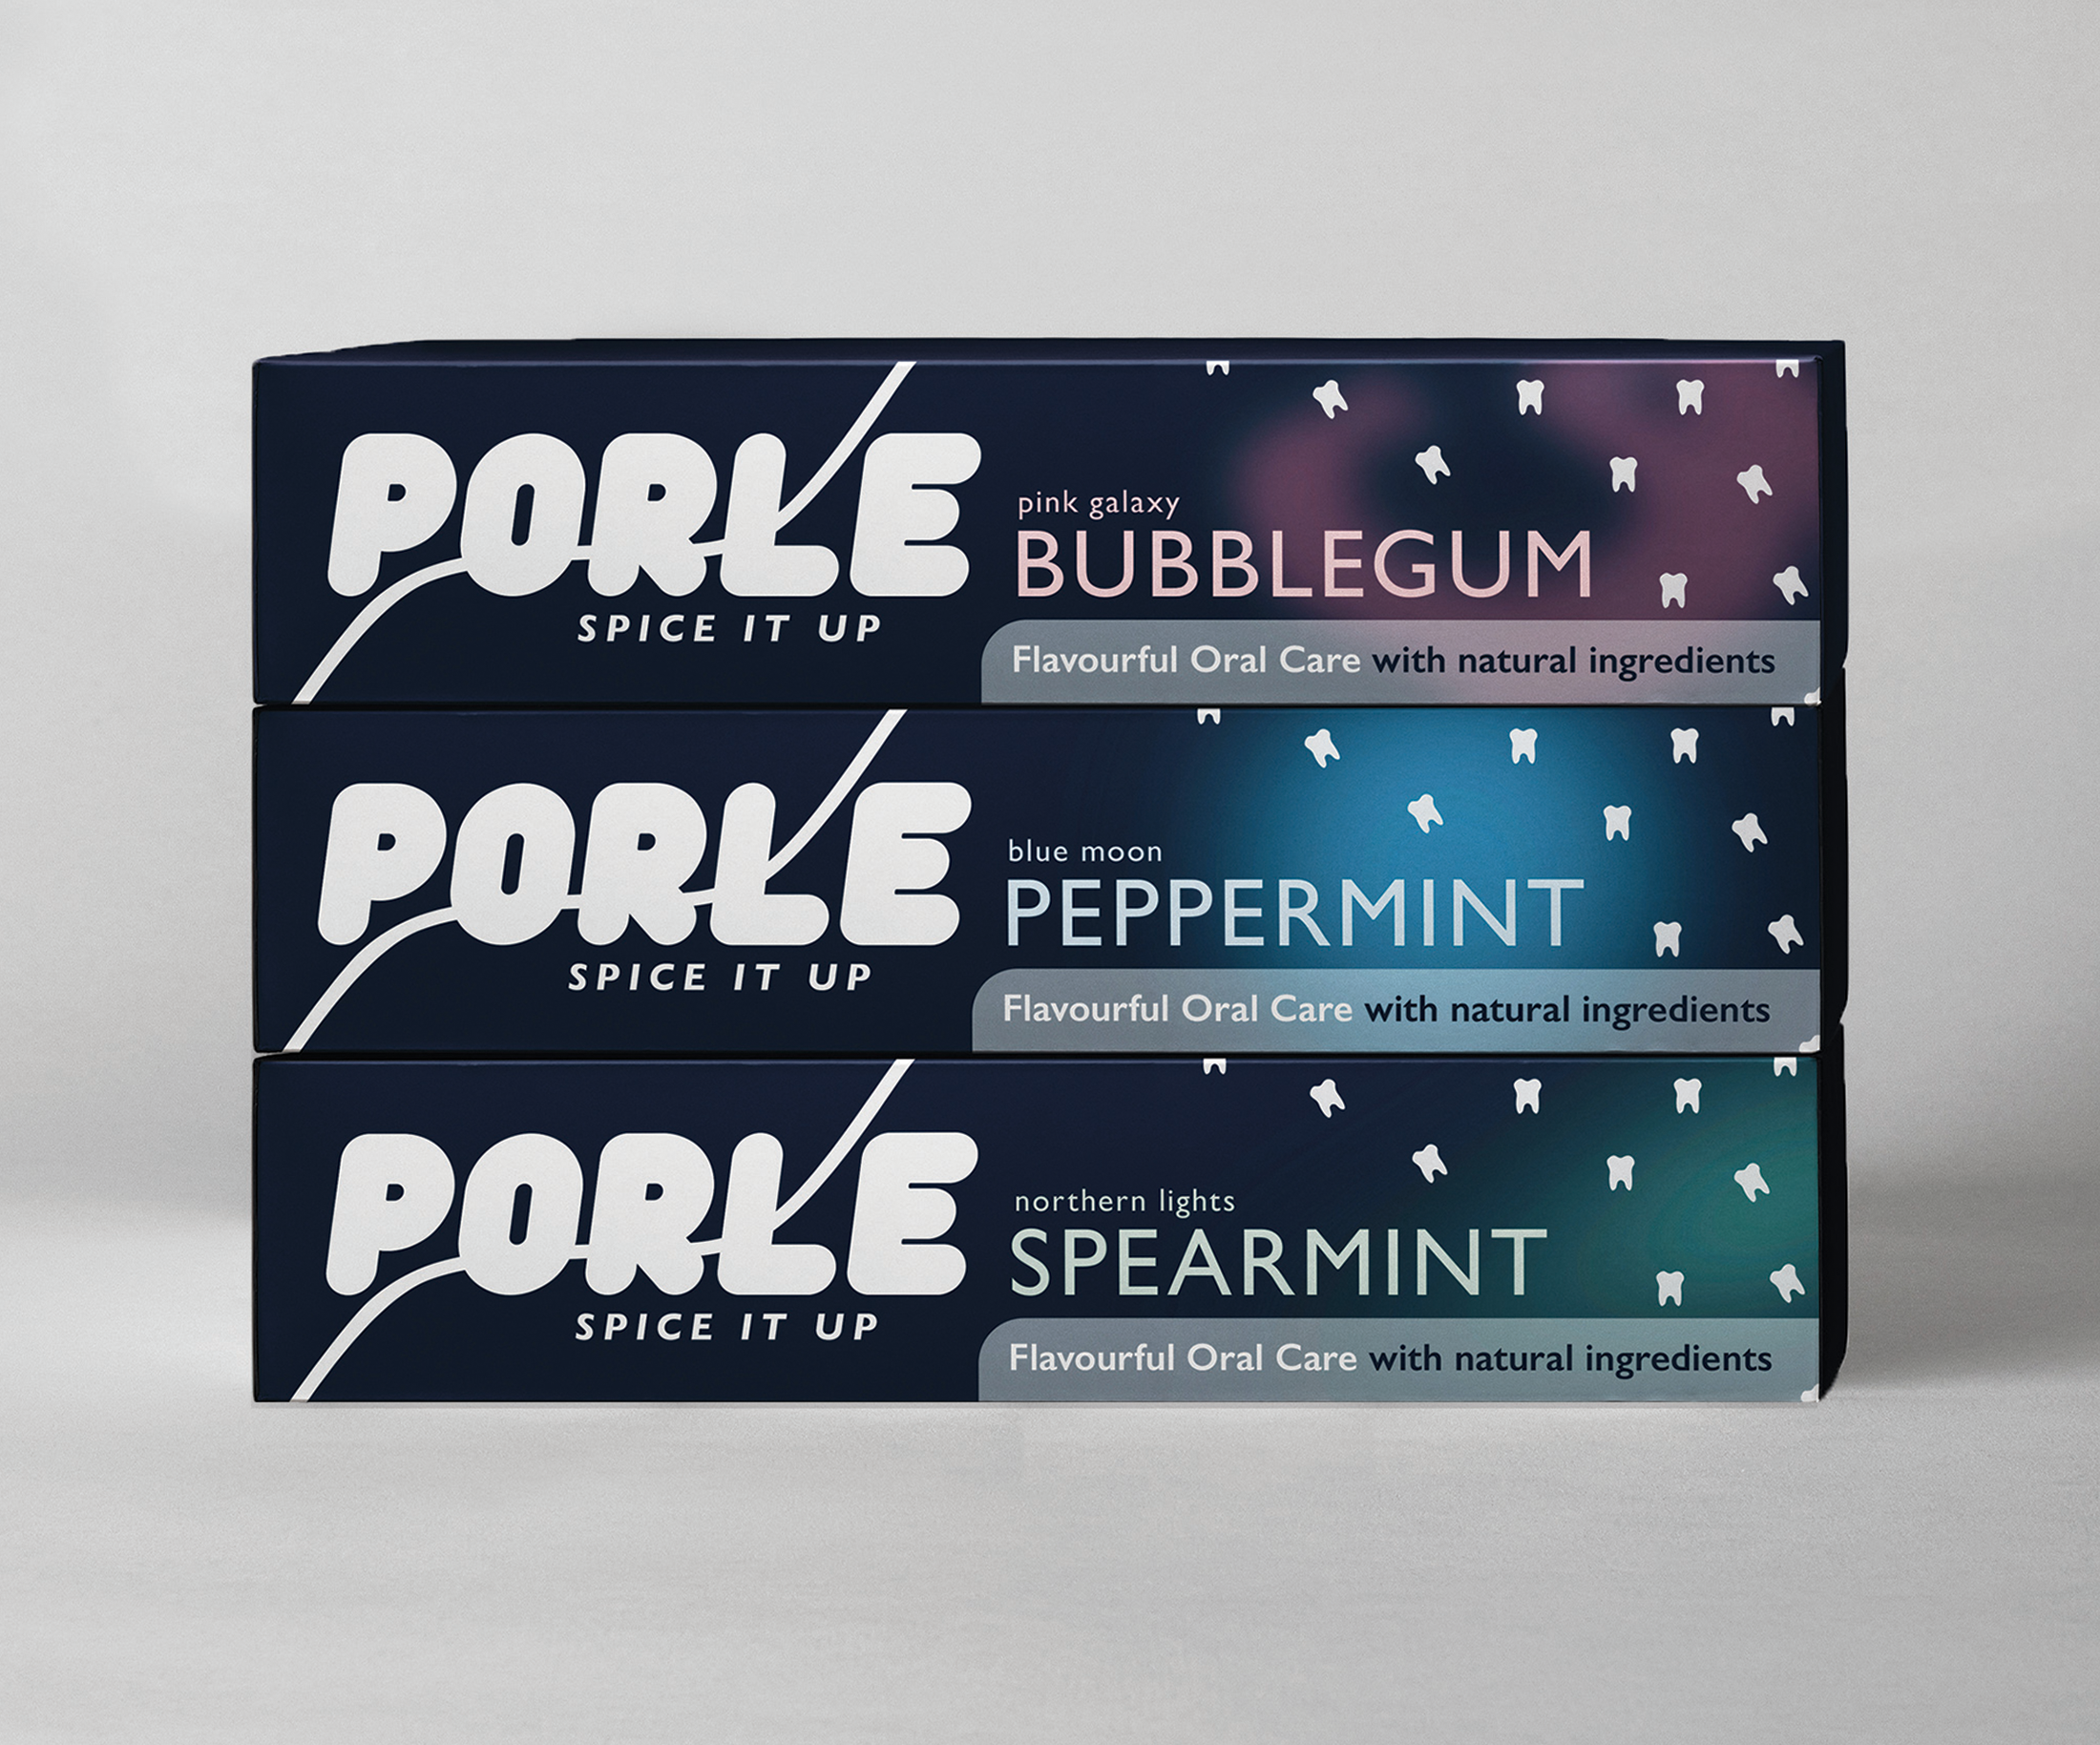 Youth Toothpaste Brand and Packaging Design - Image 1